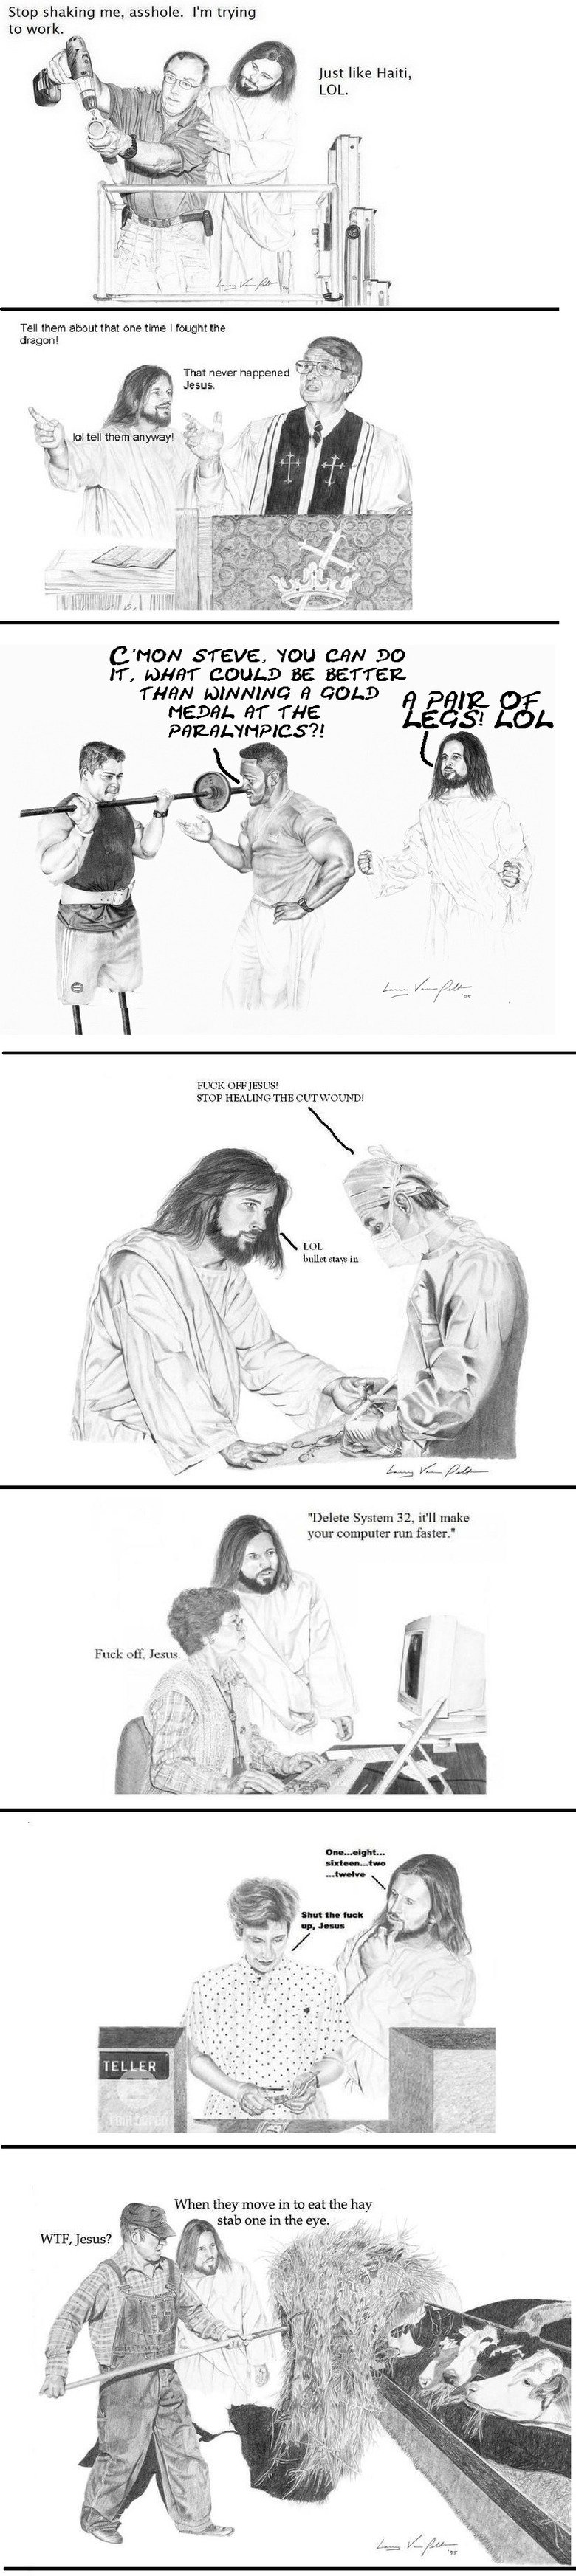 Troll Jesus. Found on /b/, comped by me. Poet and I know it (unless you read /b/ as slash be slash, cause if you do that's cool too) thumbing would make my day 